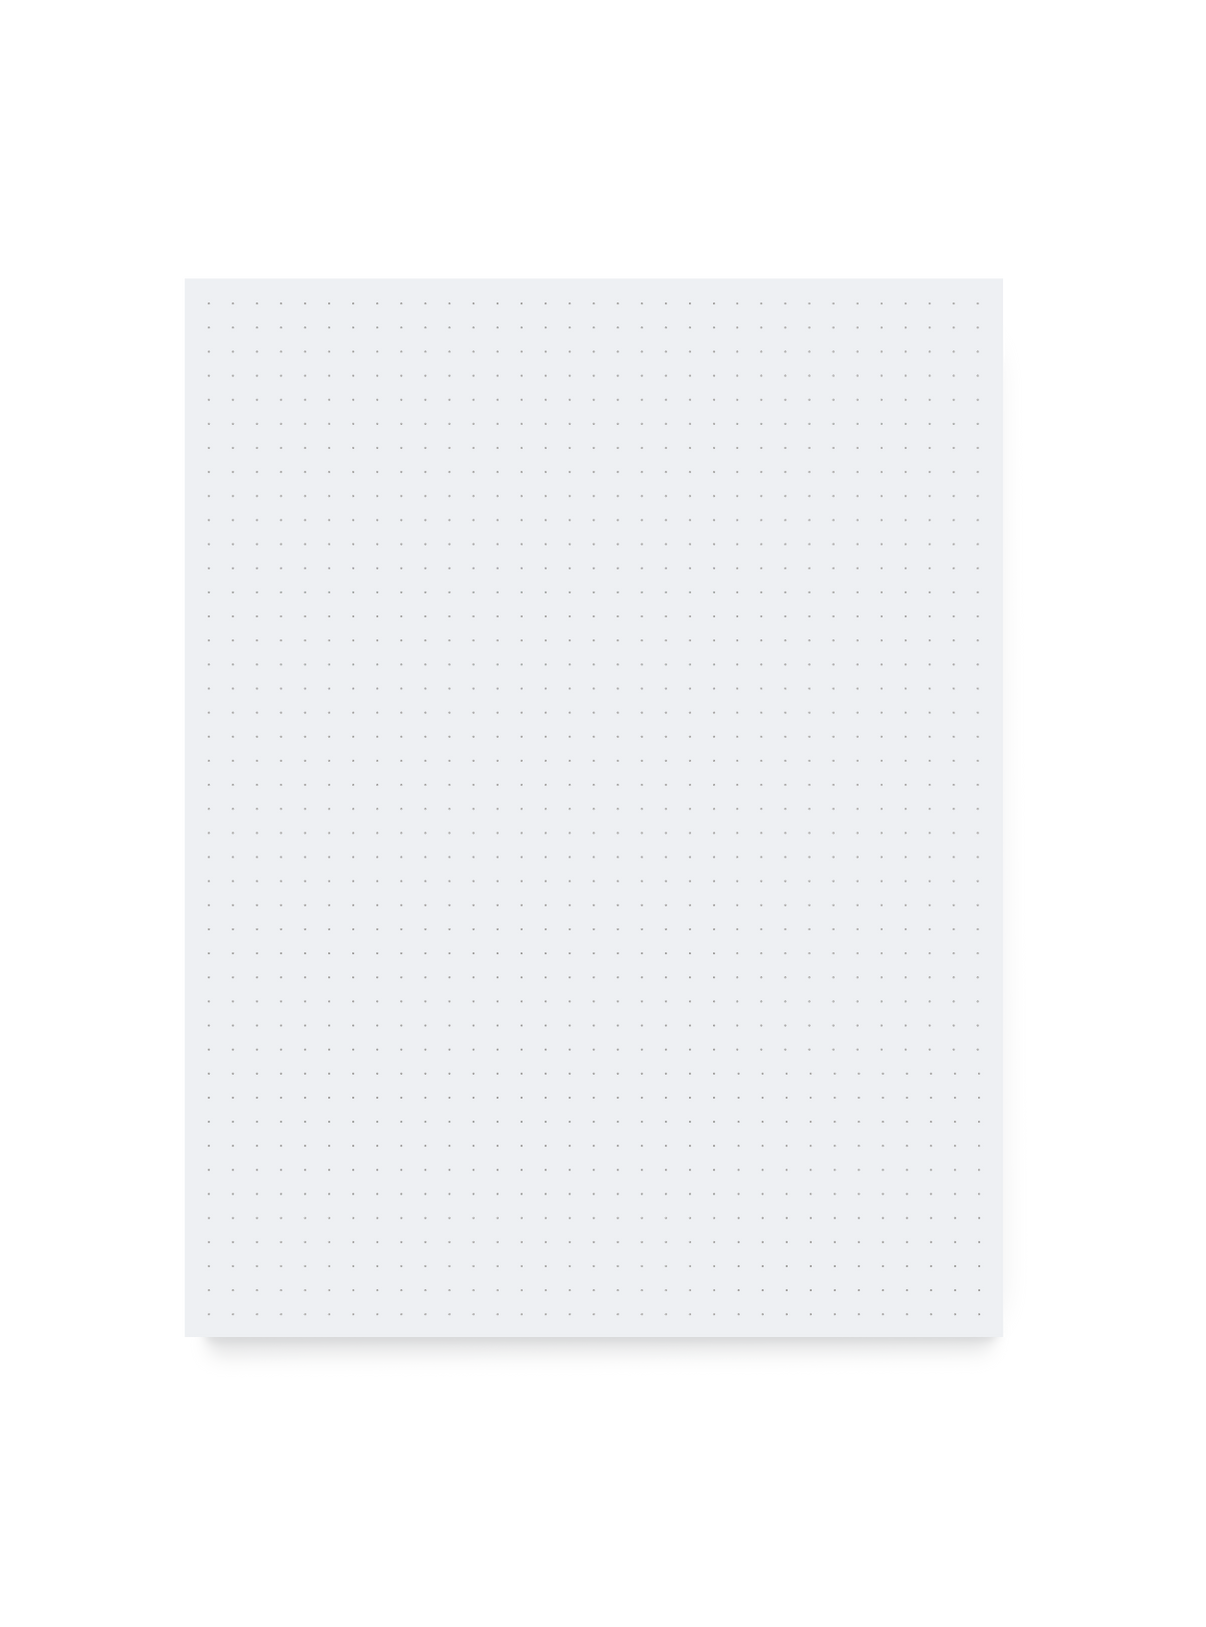 The Appointed Dot Grid Pad with white paper and cool gray dot grid pattern and tear-off sheets, front view.